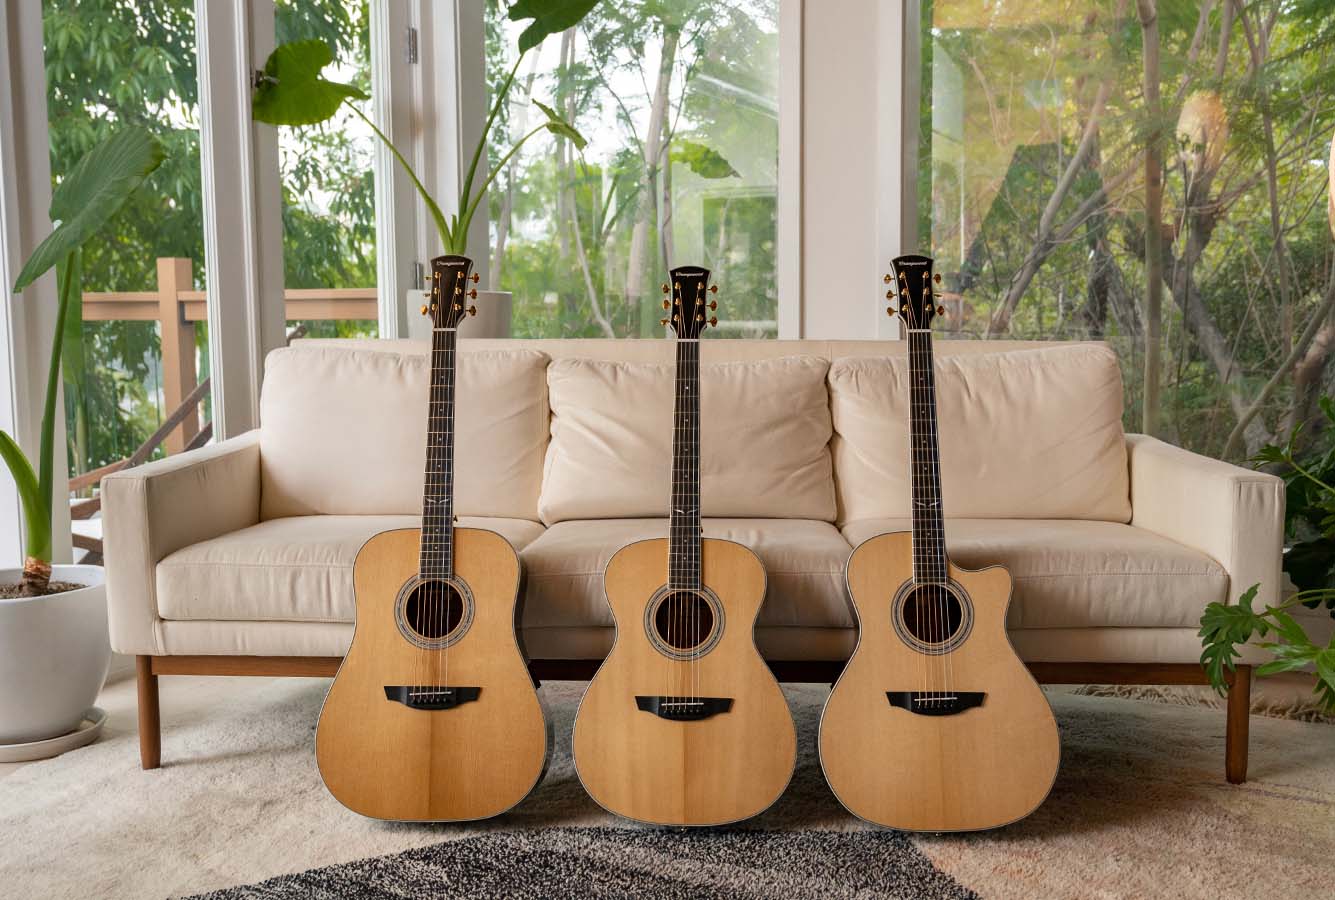 Berkeley, Sierra, and Cleo guitars sitting in front of a white sofa